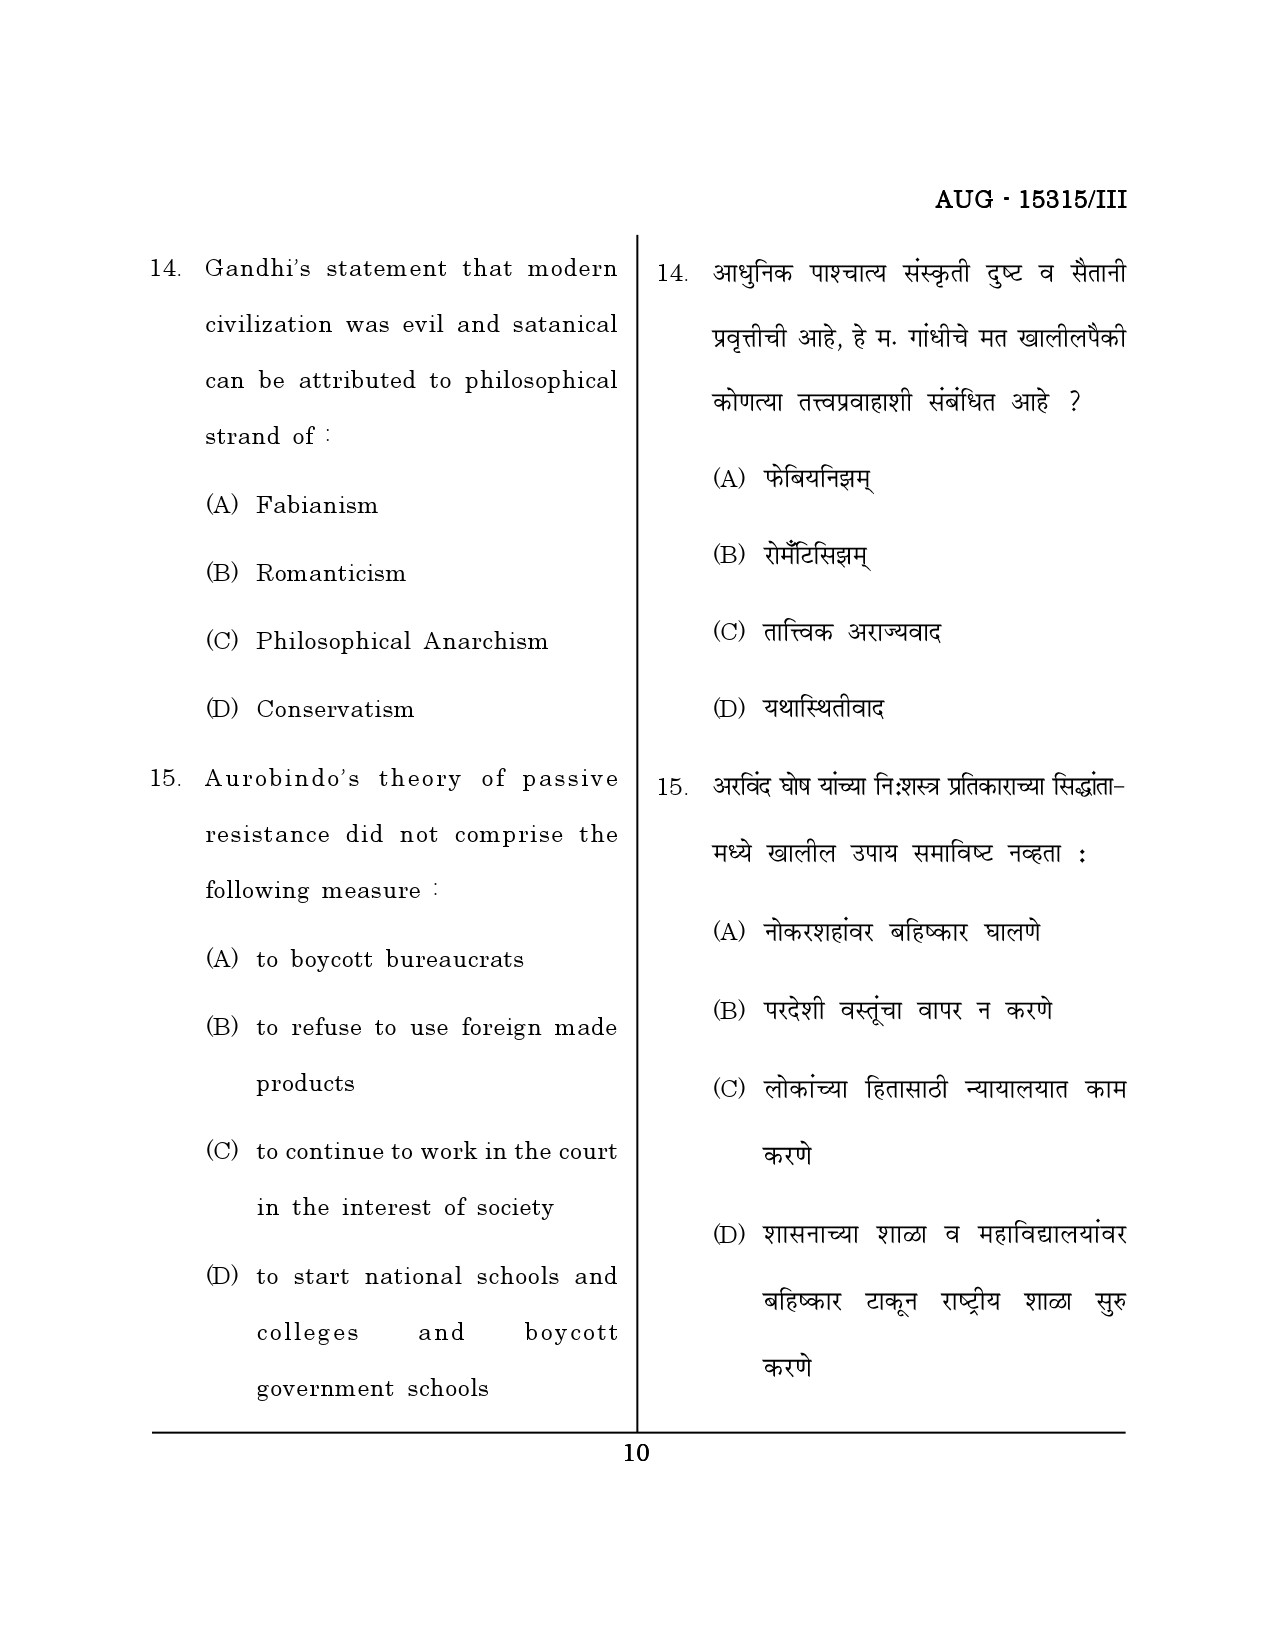 Maharashtra SET Political Science Question Paper III August 2015 9